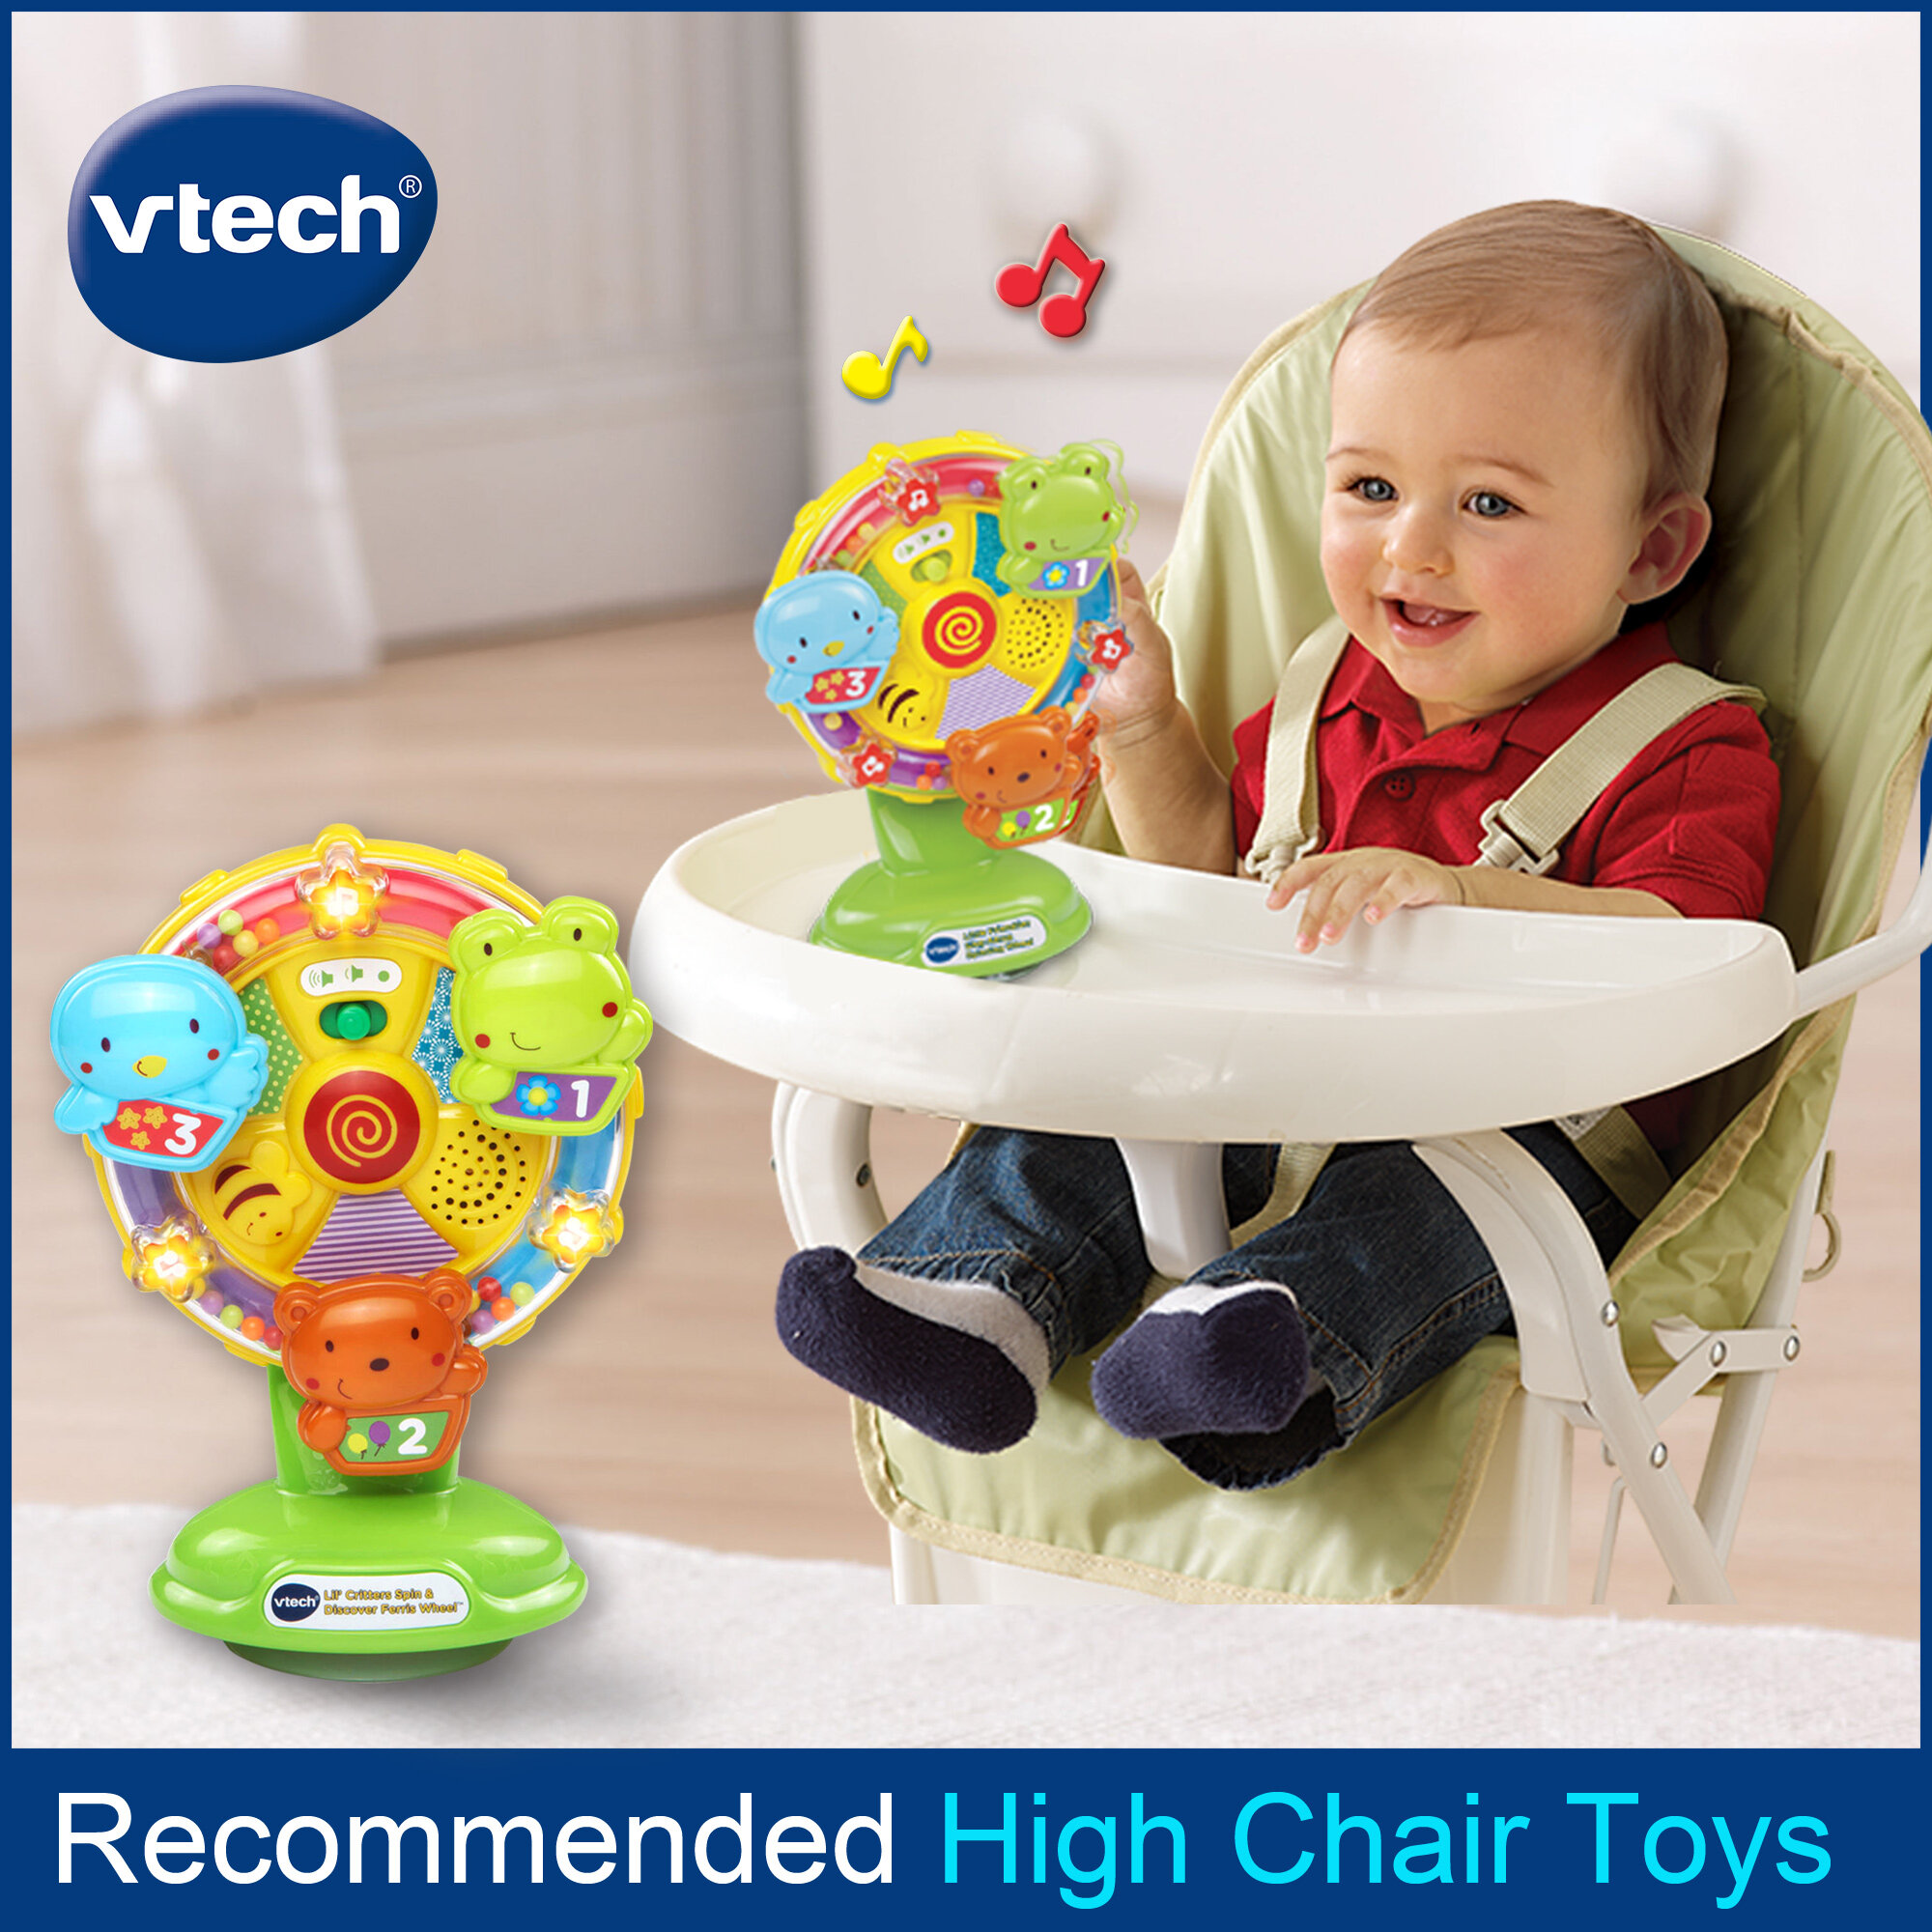 vtech baby toys 6 months